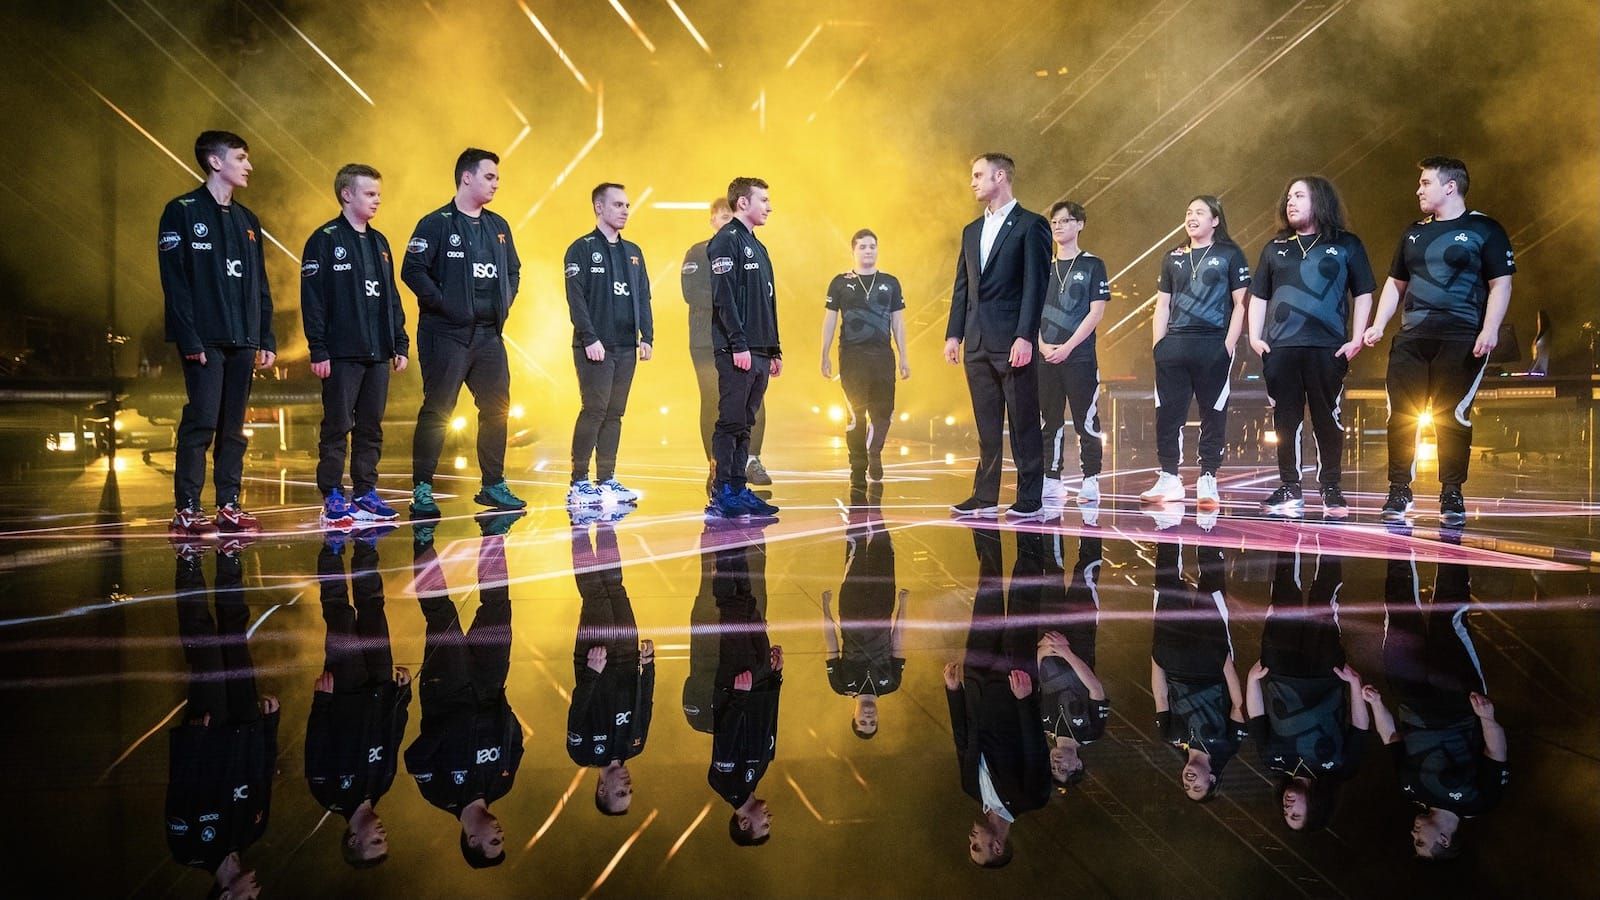 Fnatic and C9 Blue Valorant teams meet on stage before their match